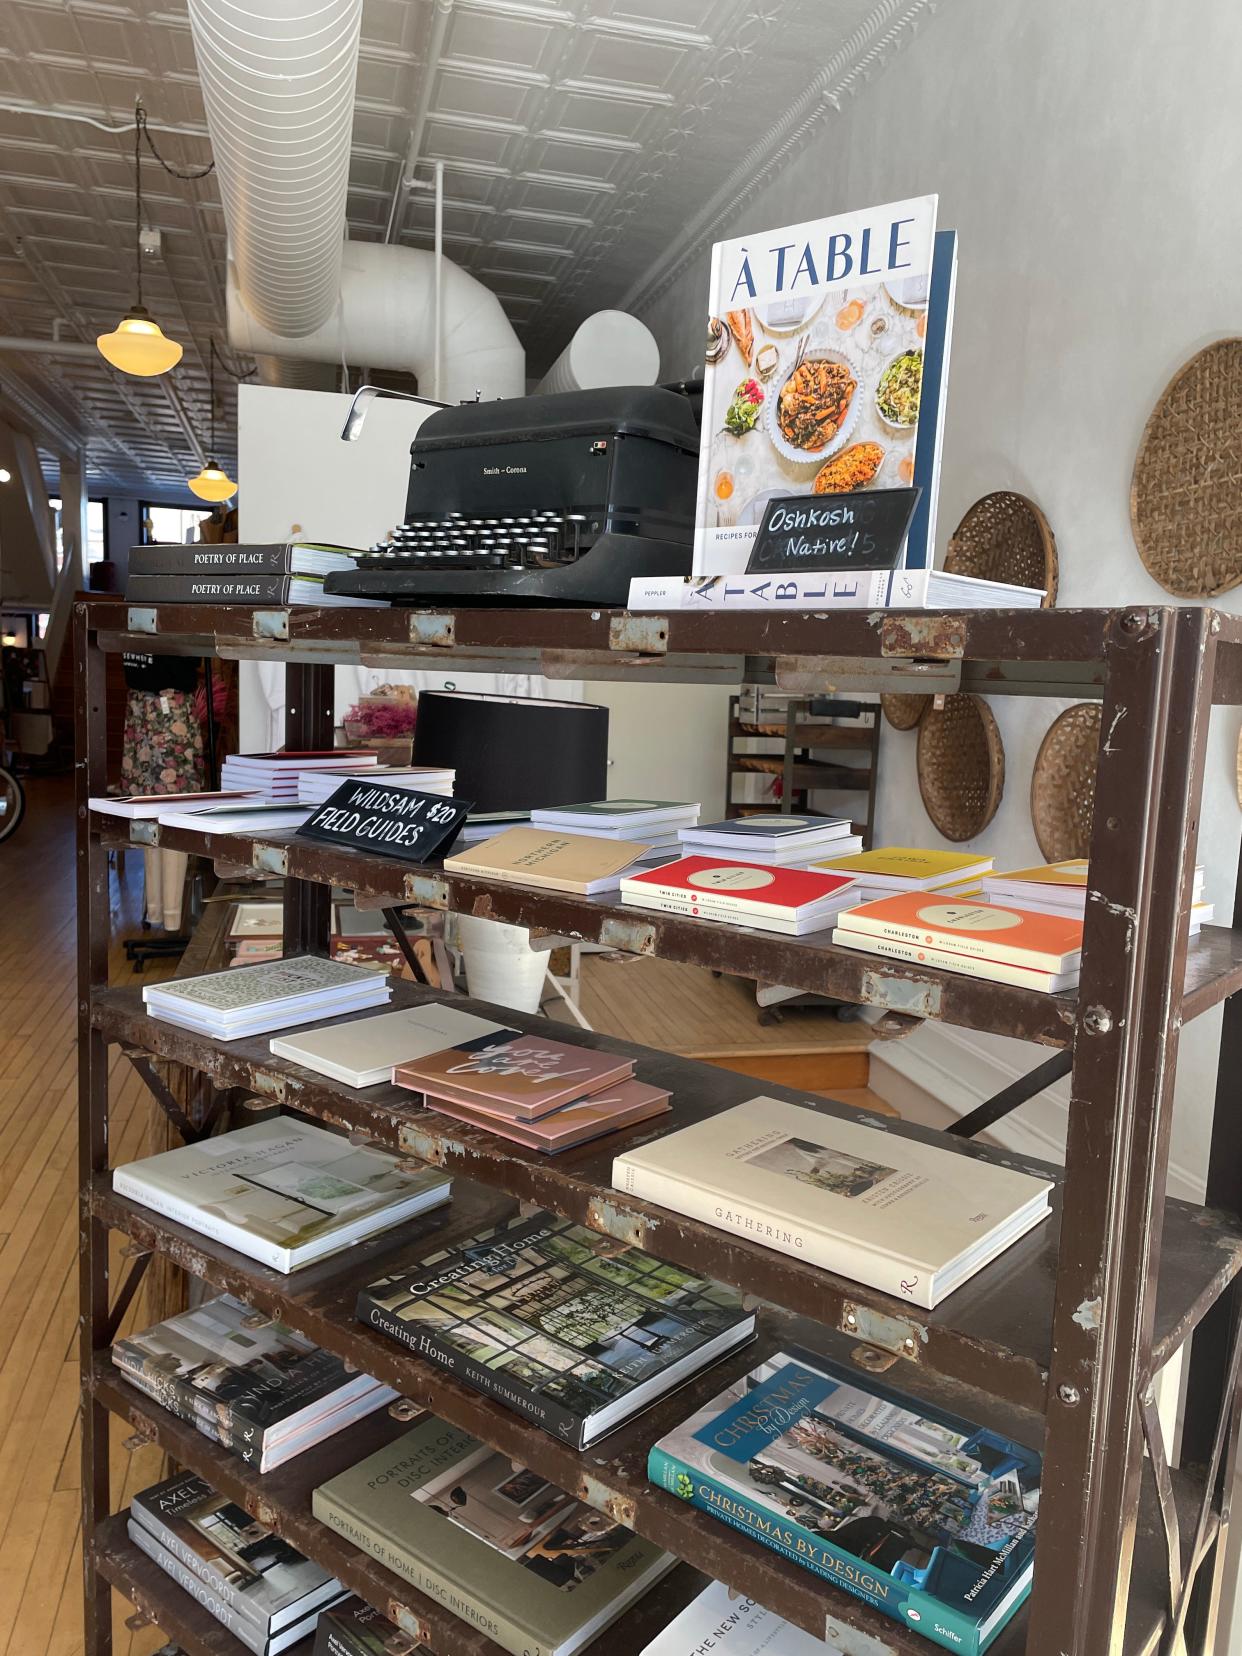 Rebekah Peppler's second book, "A Table: Recipes for Cooking and Eating the French Way" is featured at Elsewhere Market & Coffee House, 531 N. Main St., Oshkosh, where she will appear to talk about her newest book, "Le Sud" at 6 p.m. May 22.